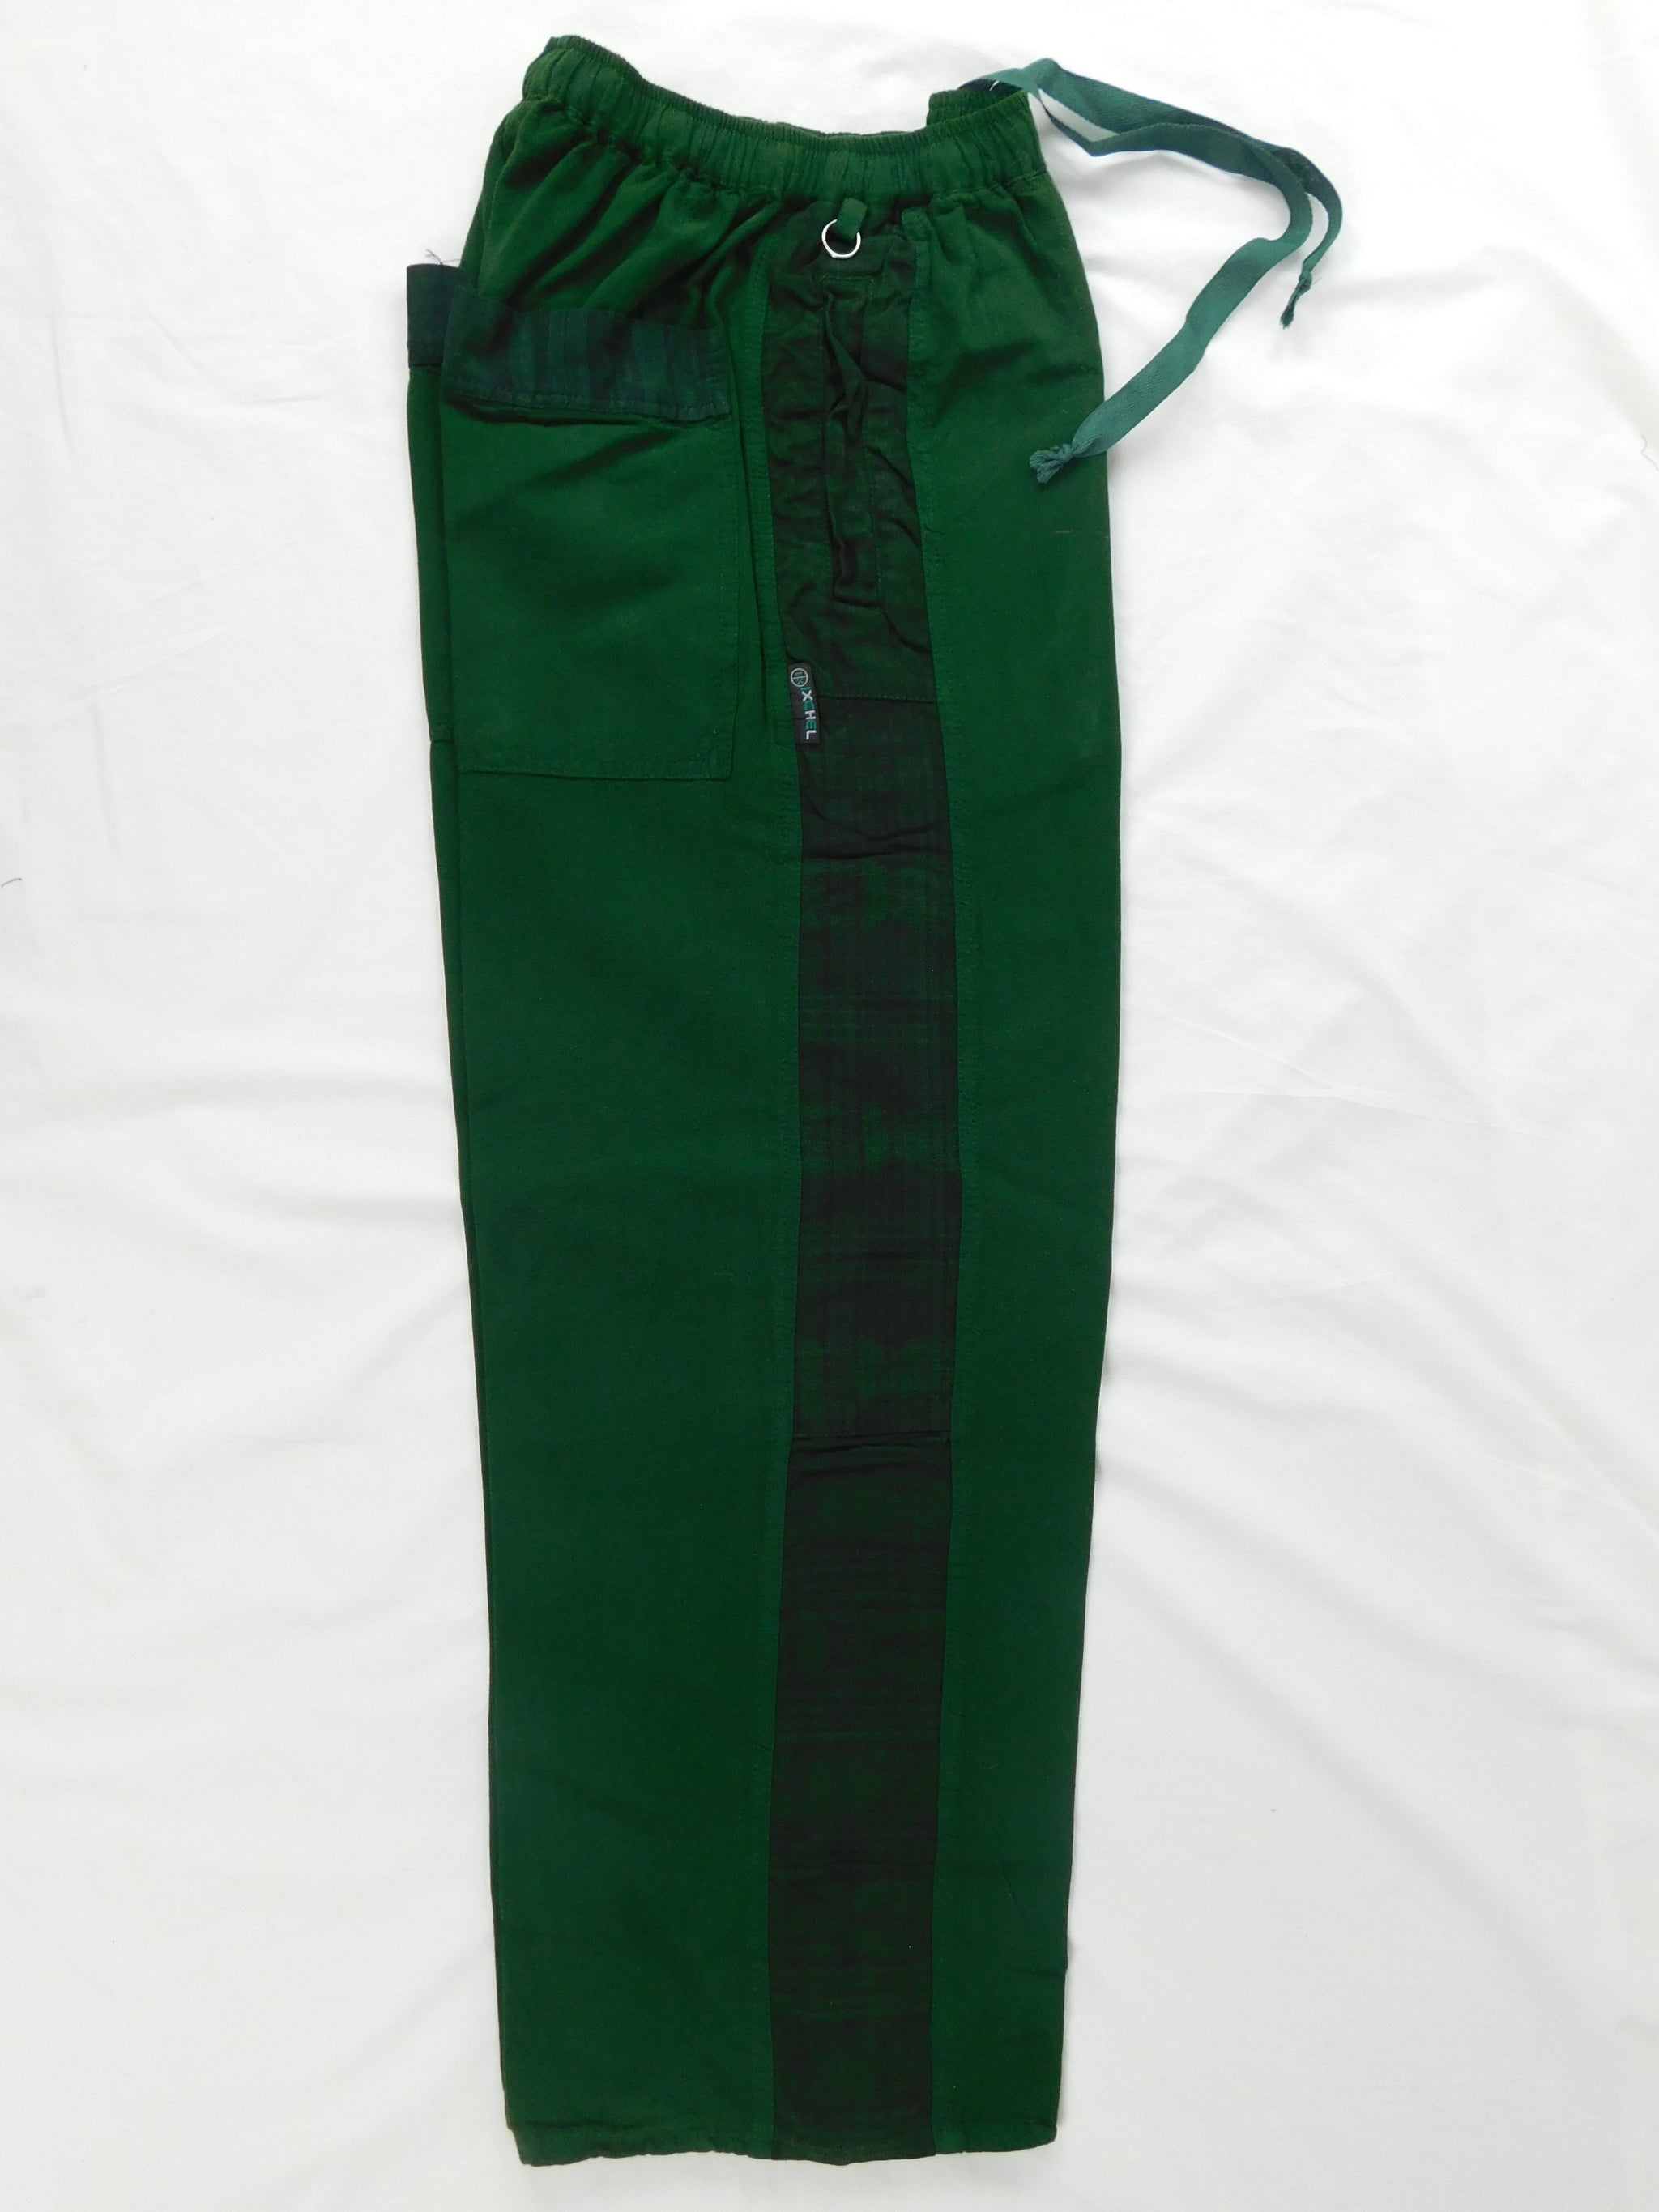 Garment dyed Patchwork Pants with hand woven patches